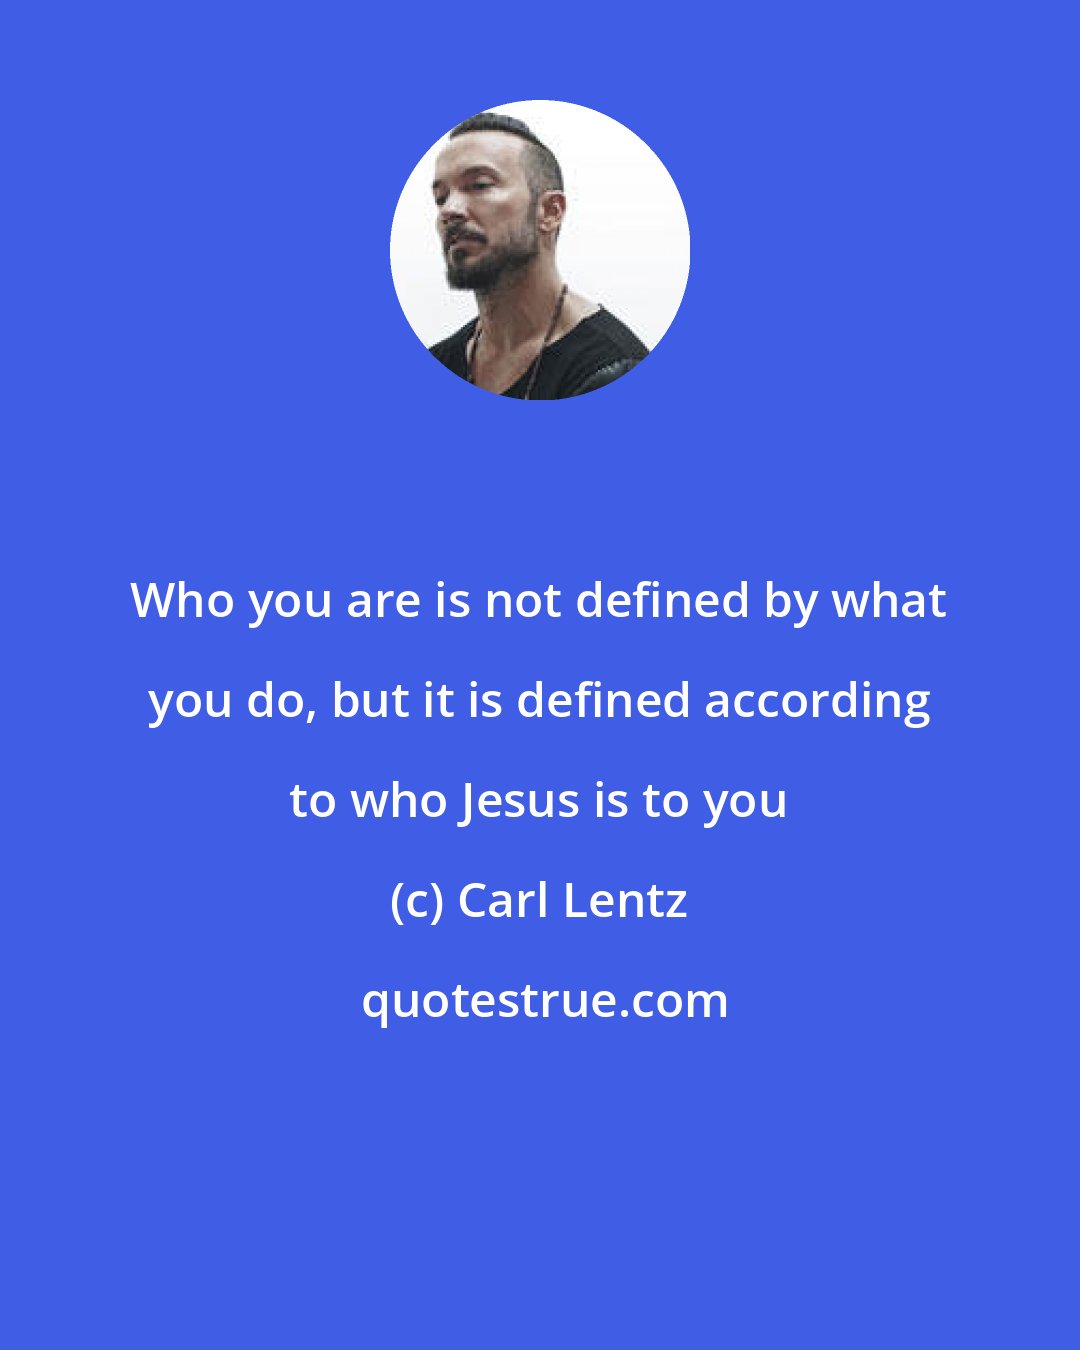 Carl Lentz: Who you are is not defined by what you do, but it is defined according to who Jesus is to you